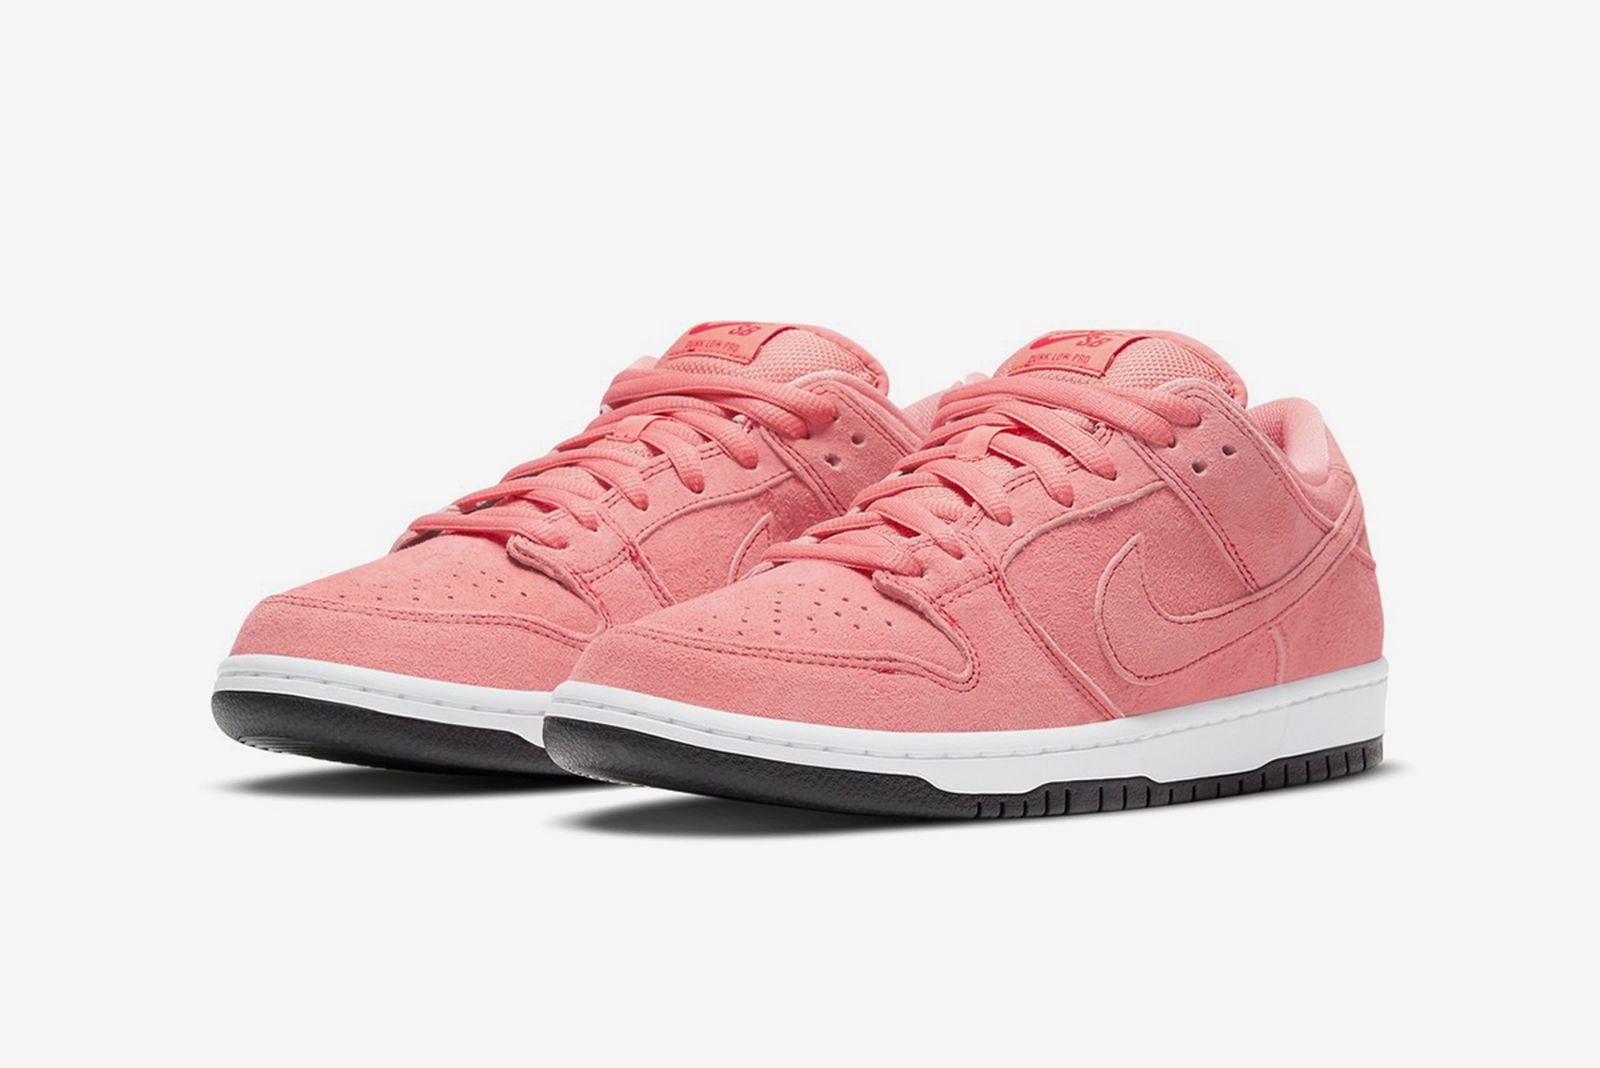 Nike SB Dunk Low Pig" & Other Sneakers a Peep